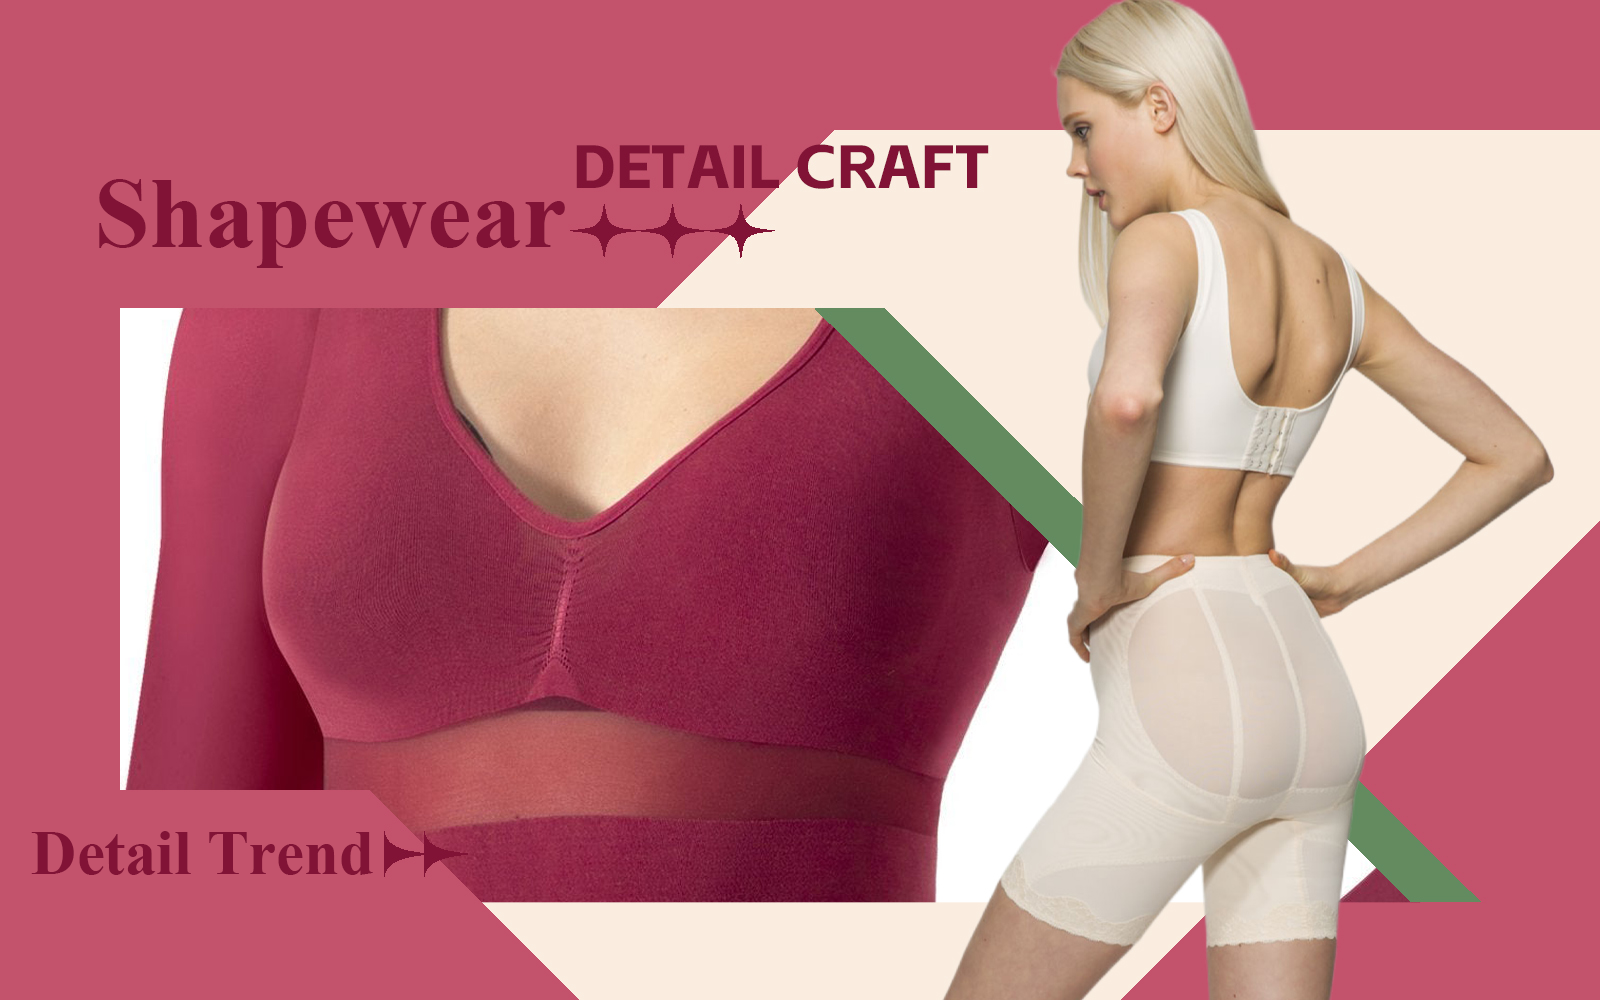 Functional Aesthetics -- The Detail & Craft Trend for Women's Shapewear